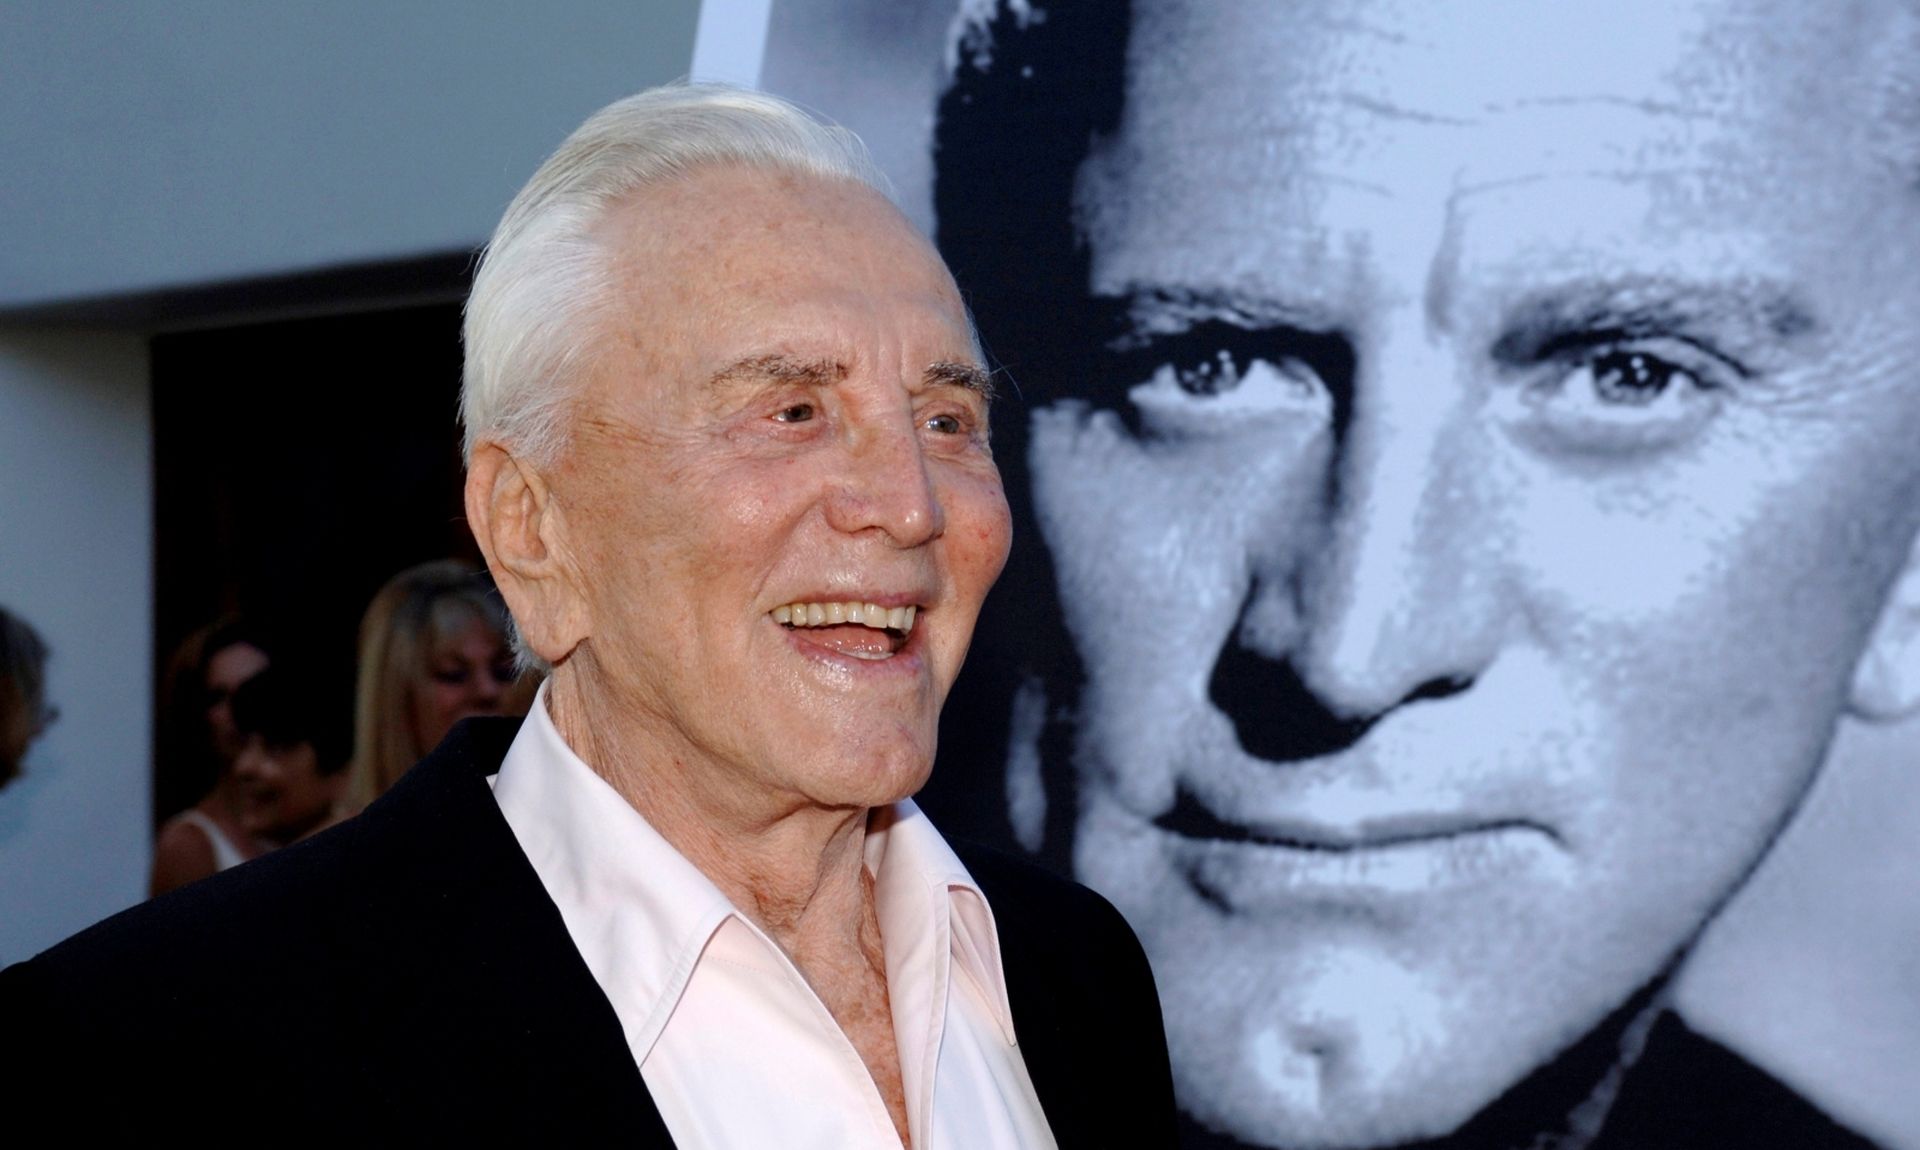 FILE PHOTO: Actor Douglas arrives to receive an inaugural award for Excellence in film presented by the Santa Barbara International Film Festival in Santa Barbara FILE PHOTO: Actor Kirk Douglas arrives to receive an inaugural award for Excellence in film presented by the Santa Barbara International Film Festival at a black-tie gala fundraiser in his honor at the Bacara Resort & Spa in Santa Barbara, California, July 30, 2006. REUTERS/Phil Klein/File Photo Phil Klein